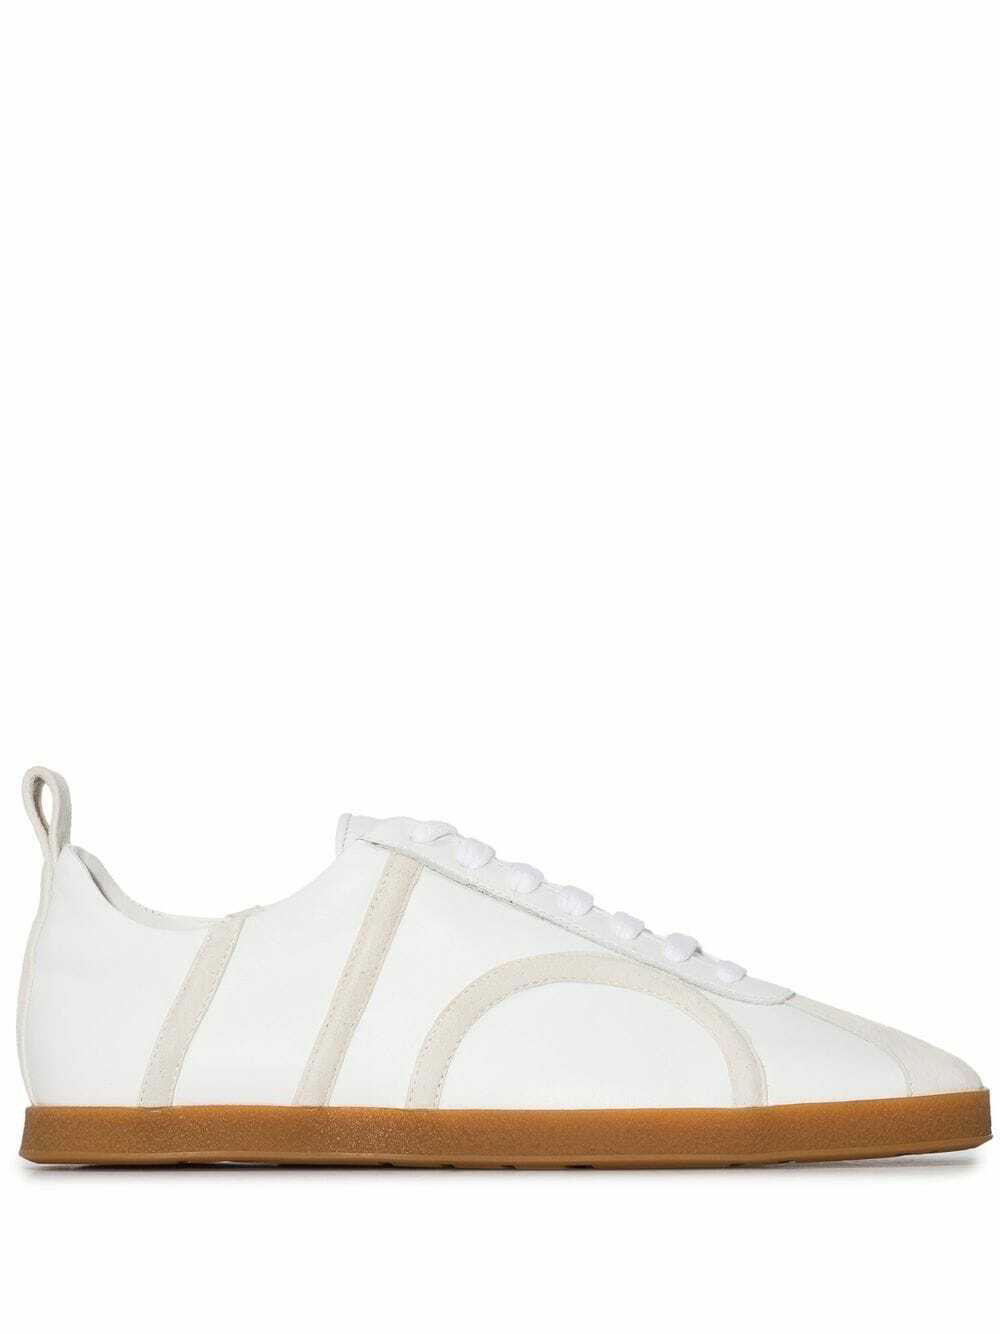 TOTEME - Leather Sneakers Toteme